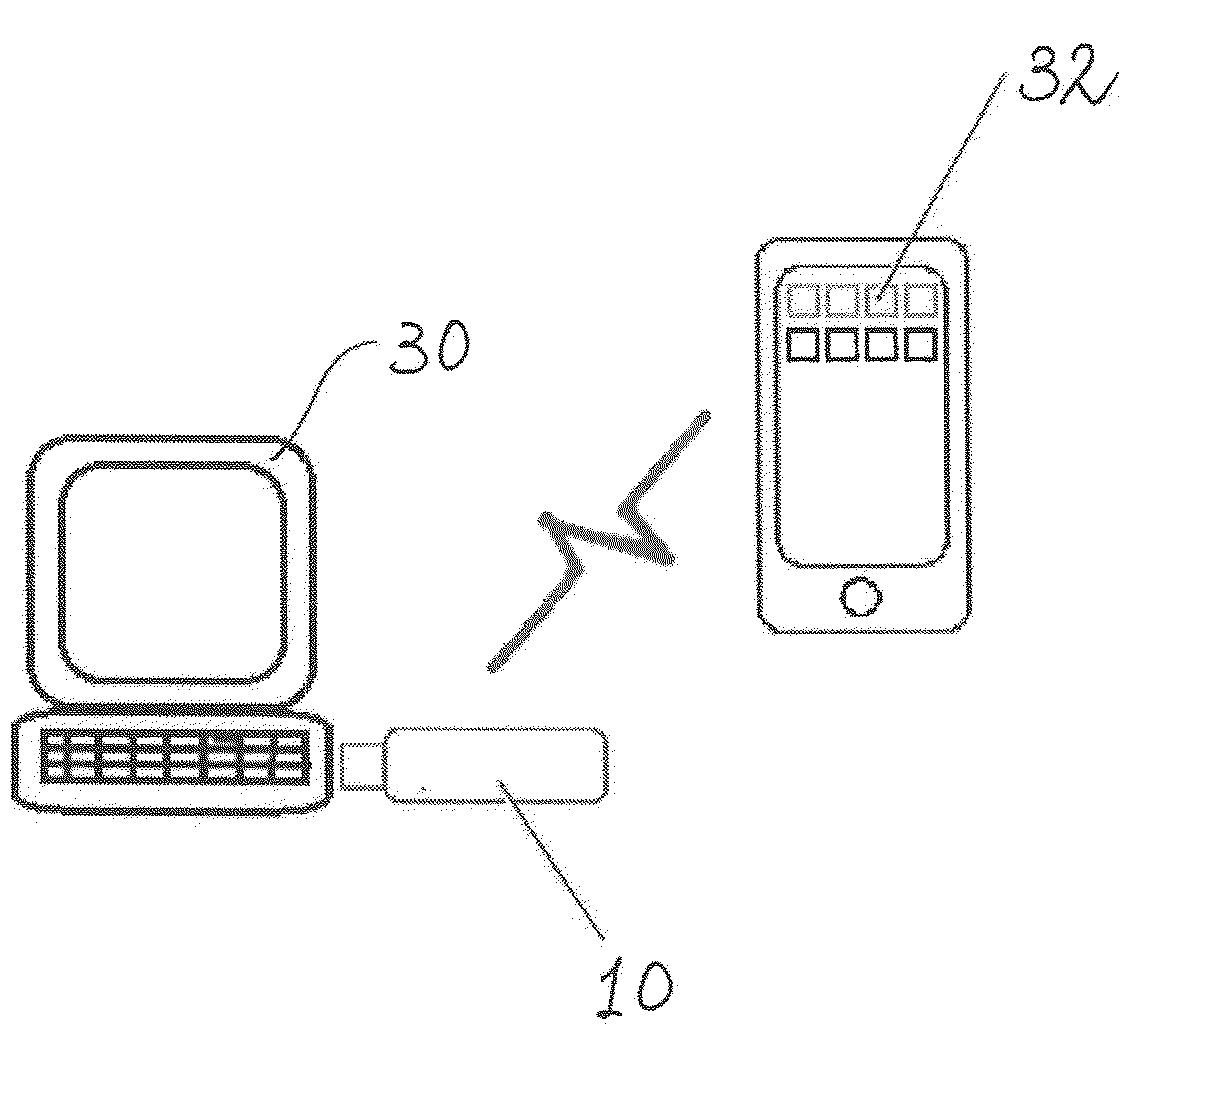 Universal Serial Bus (USB) Flash Drive Security System And Method